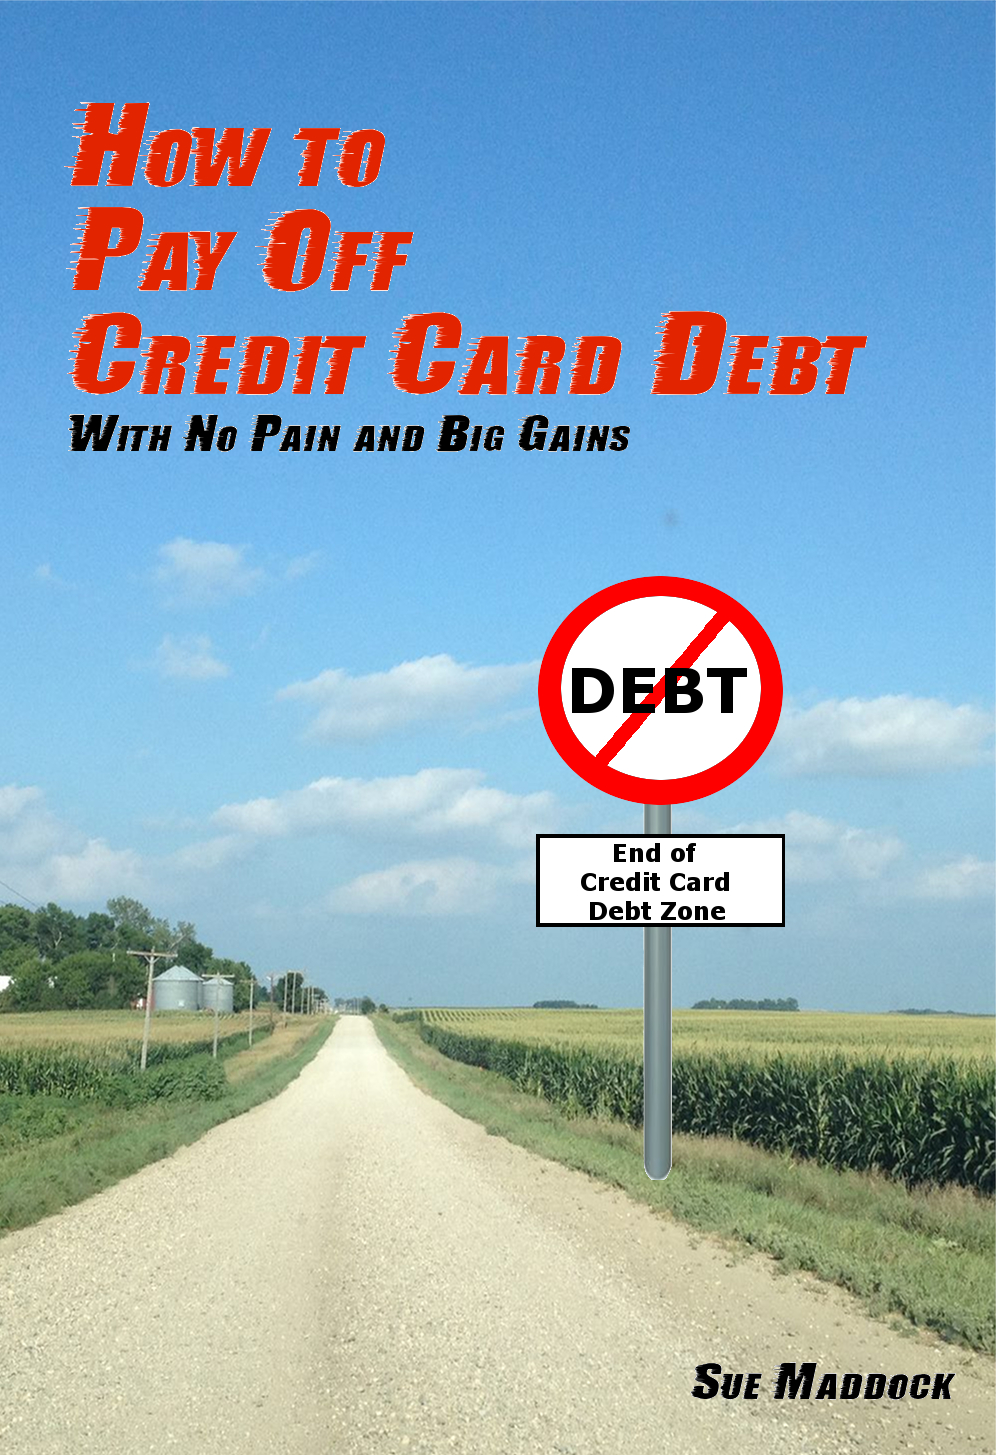 get-out-of-credit-card-debt-without-paying-interest-how-to-pay-off-credit-card-debt-fast-in